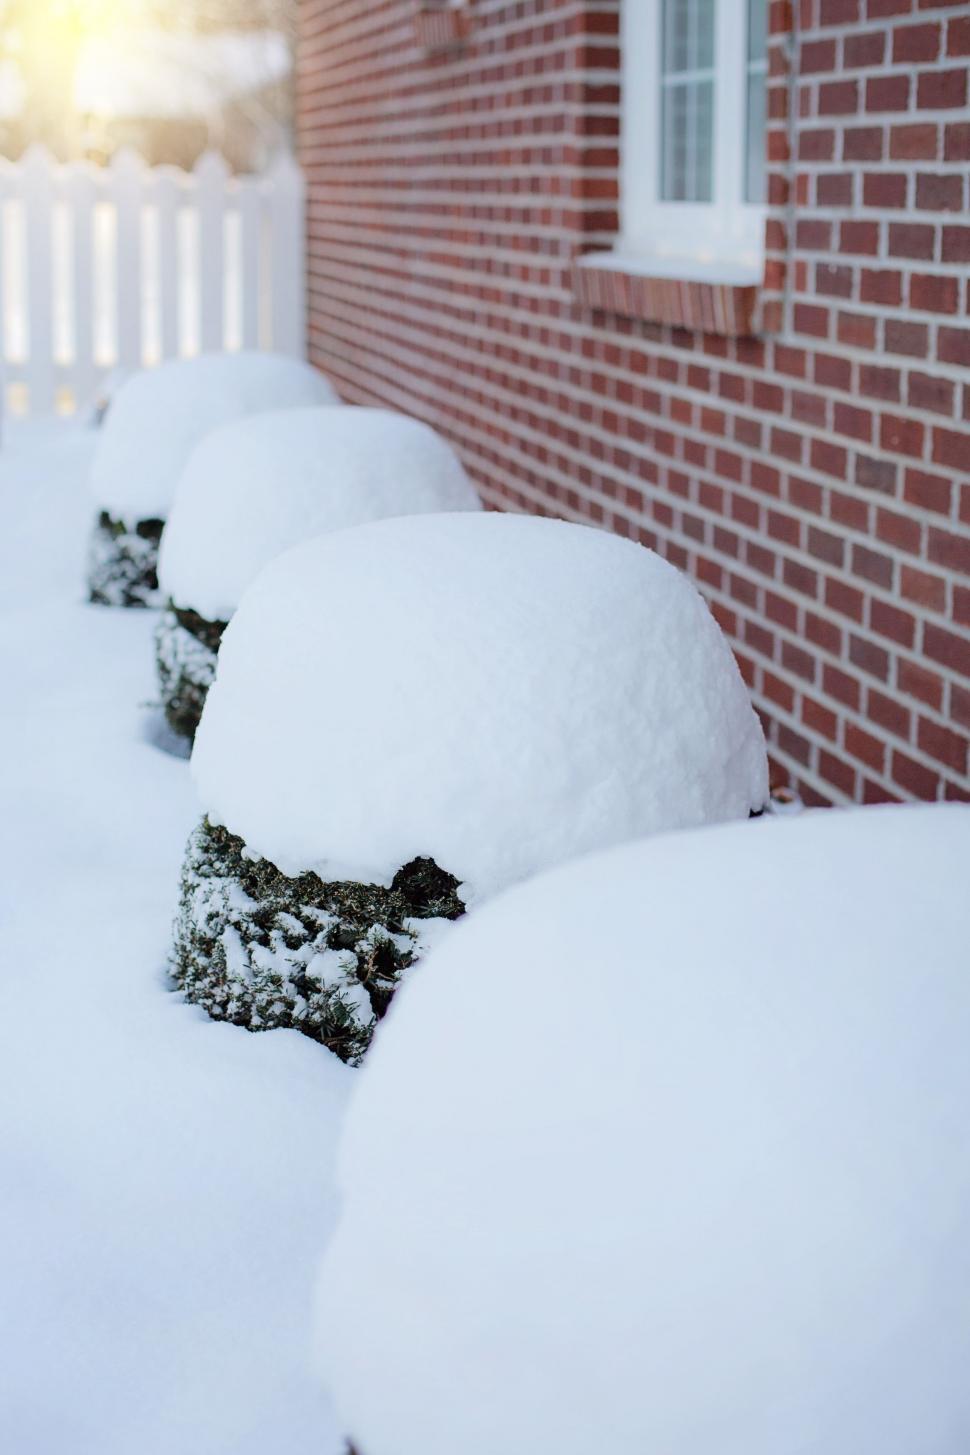 Free Image of Snow on bushes 